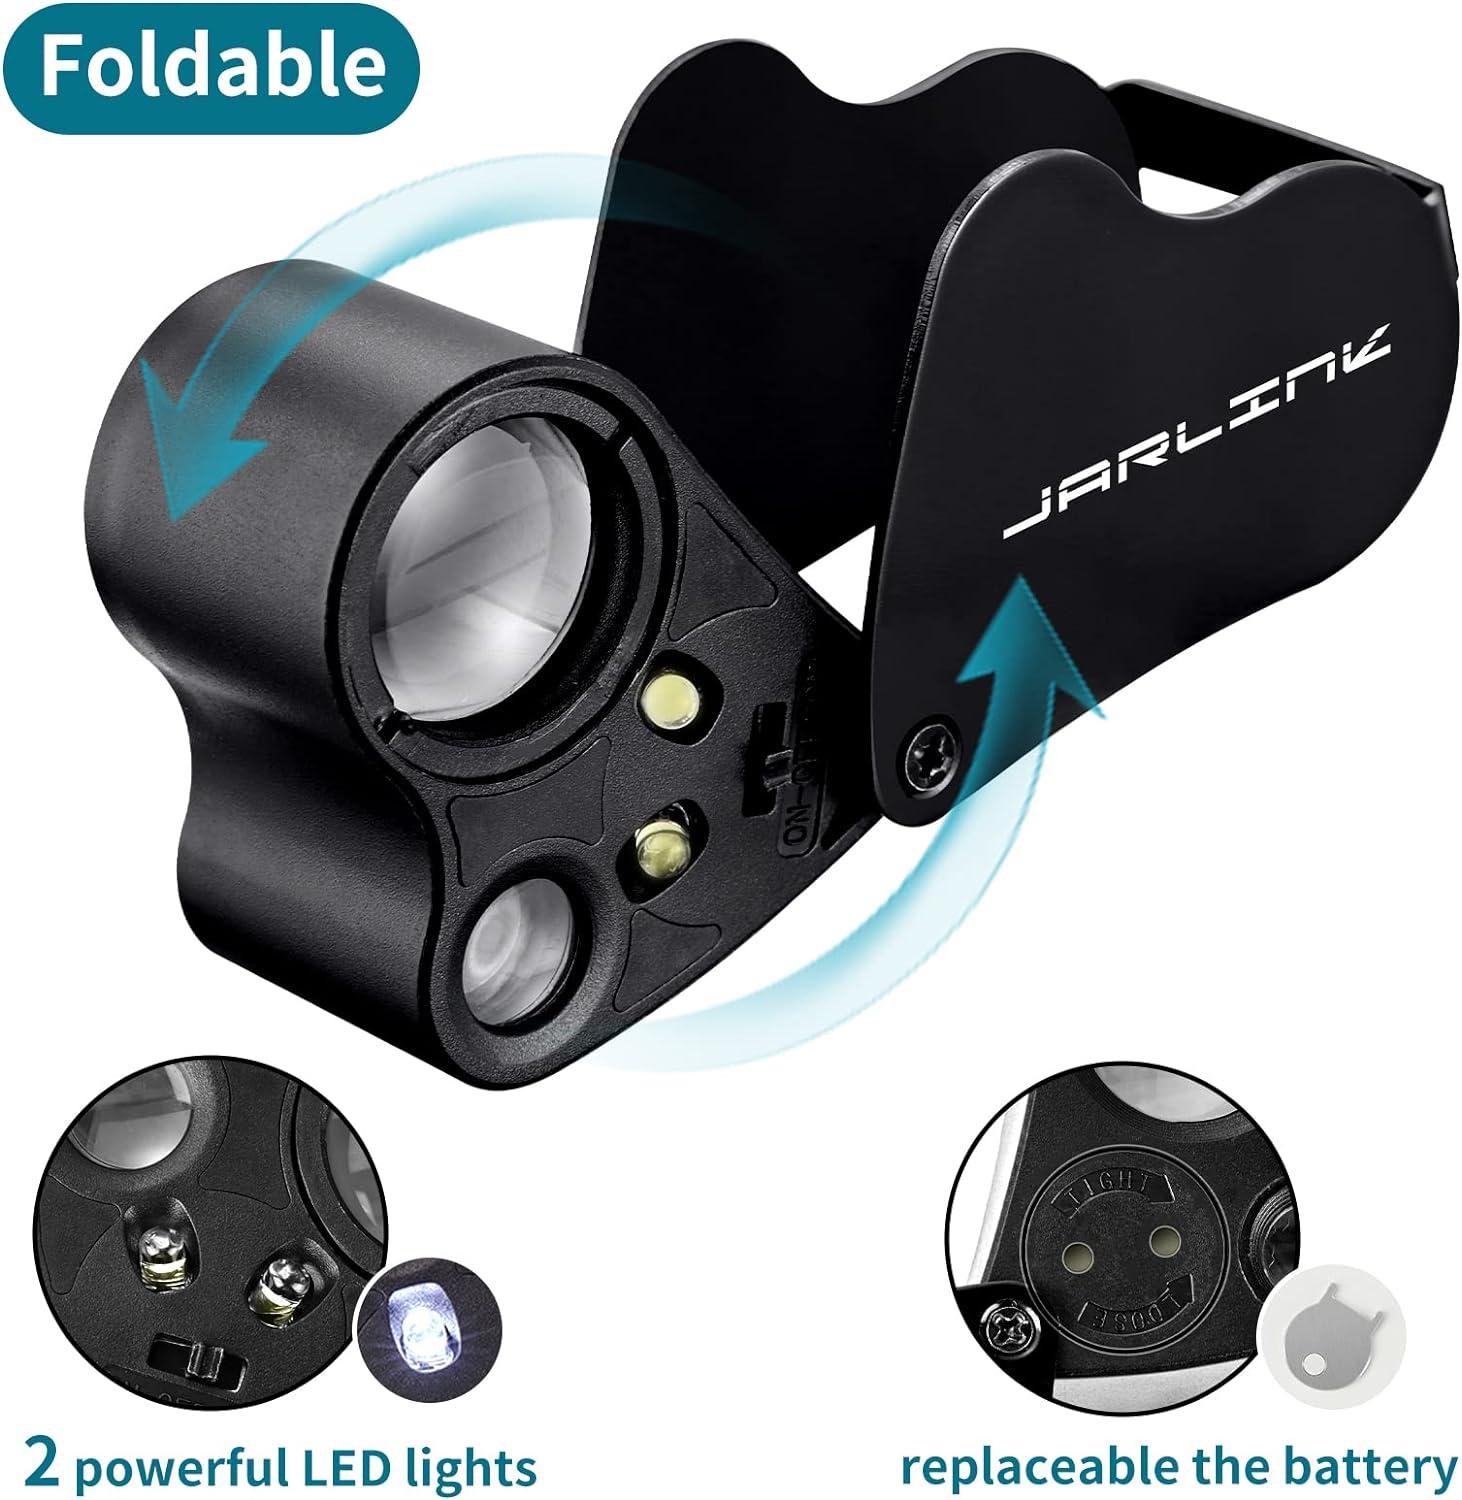 EL9608 = Jewelers' Loupe 20x Magnification with LED Light by